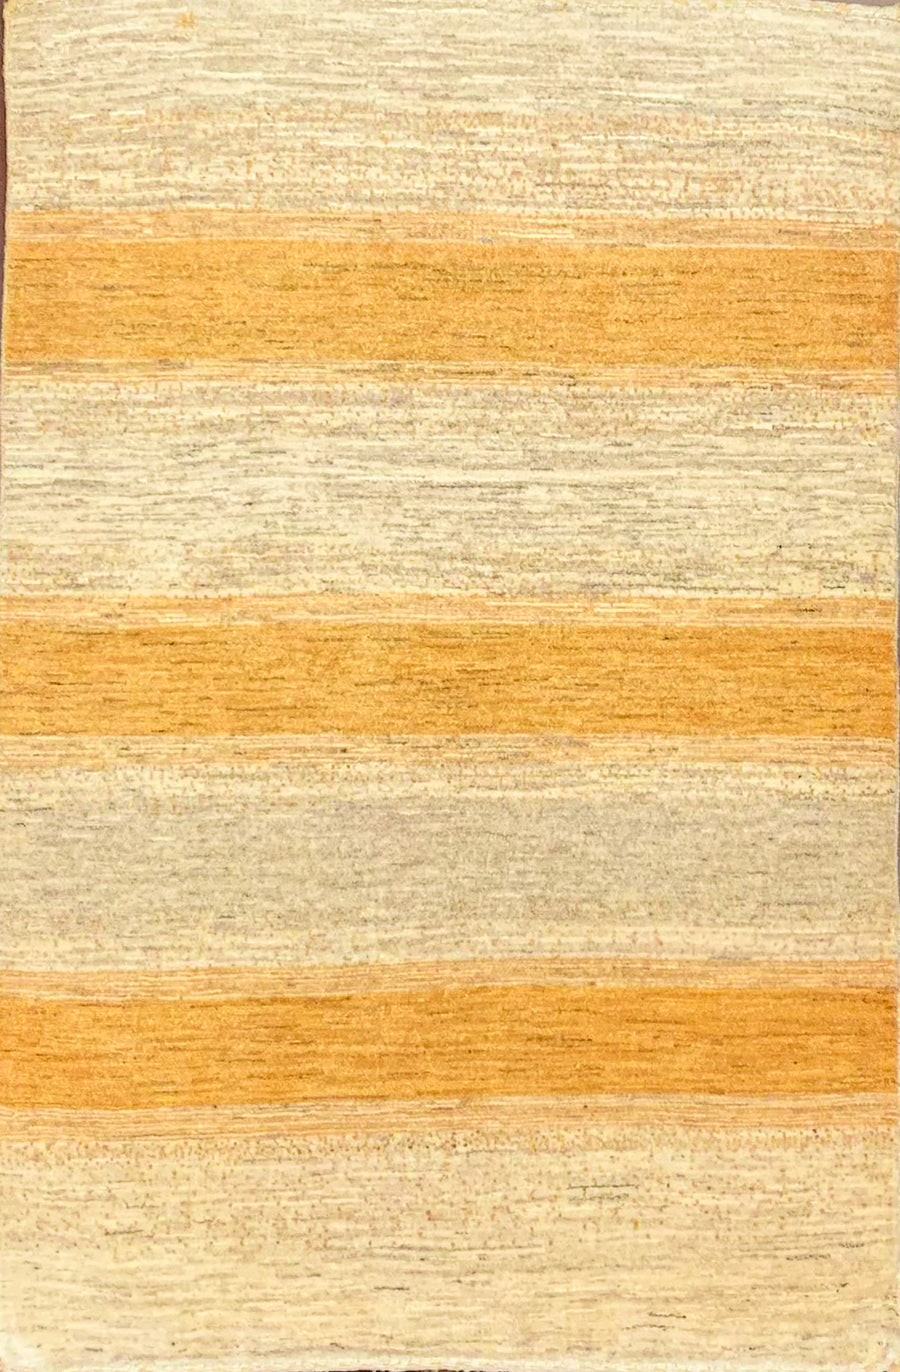 Handmade Tribal 3x5 Gabbeh with broad Golden Yellow Stripes on undyed Naturally toned wool.